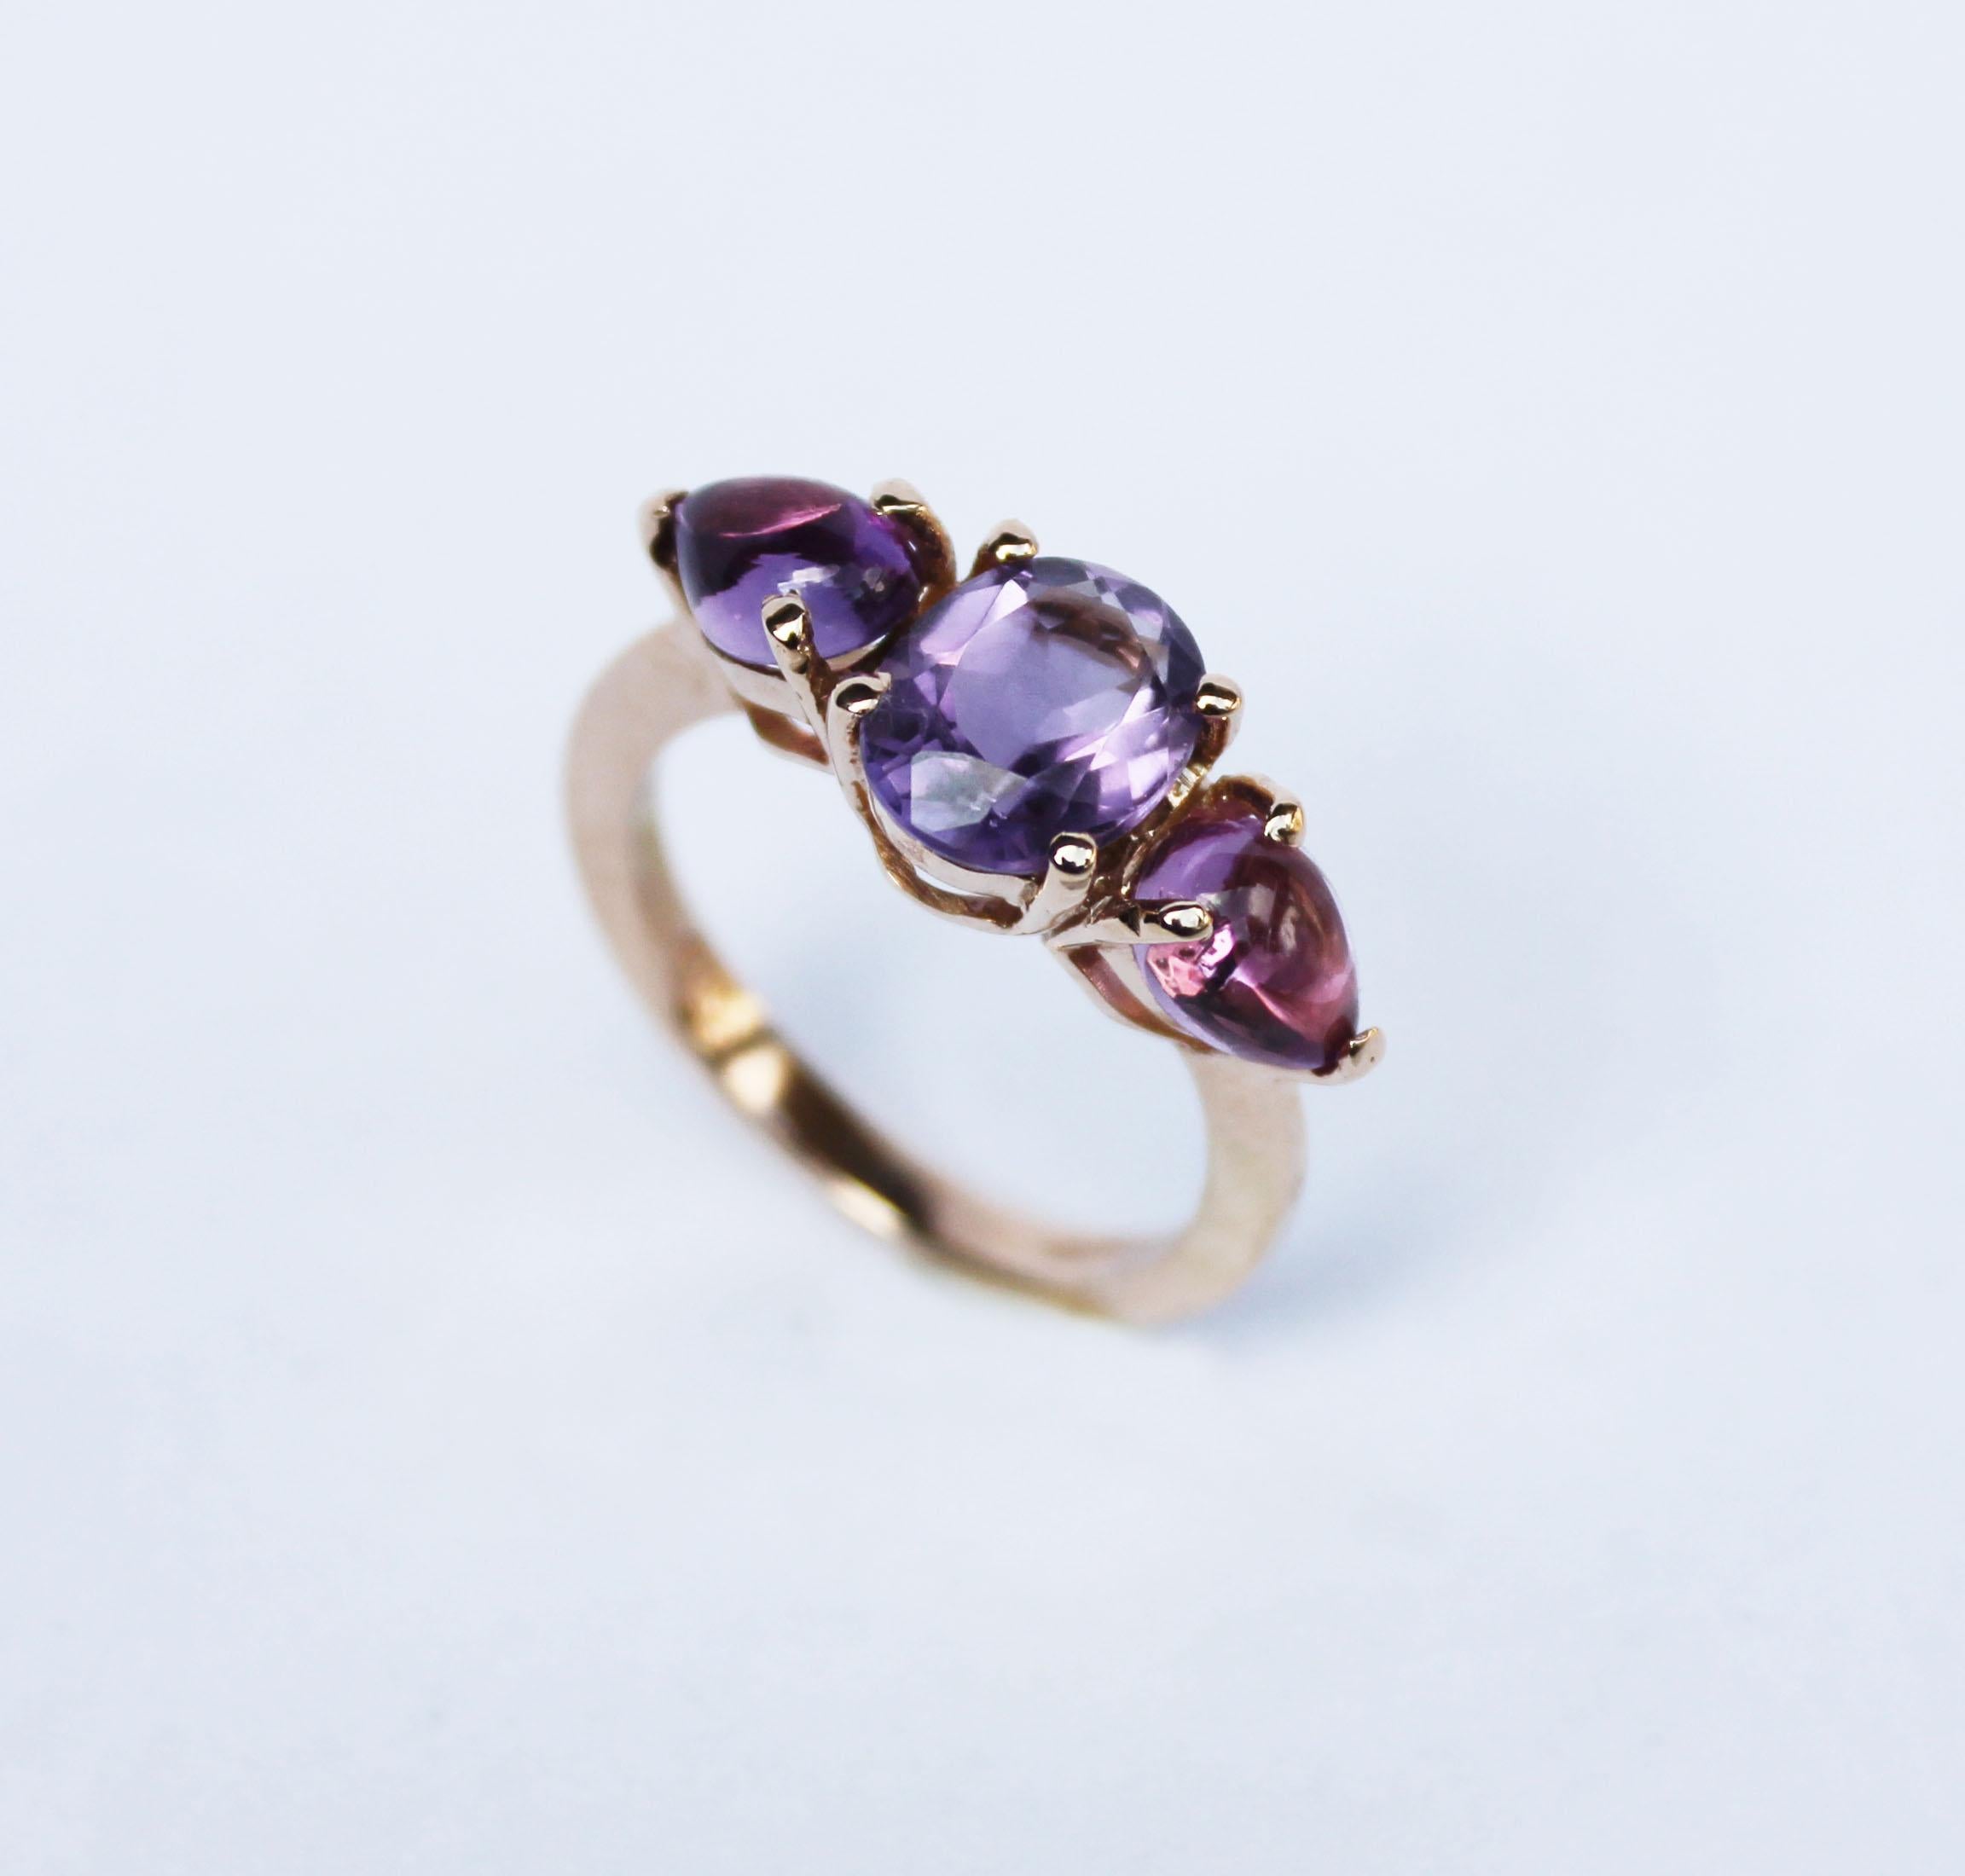 Cocktail ring in rose gold with amazing Amethyst stone (oval cut, size: mm) and Pink Tourmaline (drop cabochon cut, size: mm). The designer Gisella has a refined taste, her jewels stand out from others.
Designed and handmade in Italy by Stanoppi